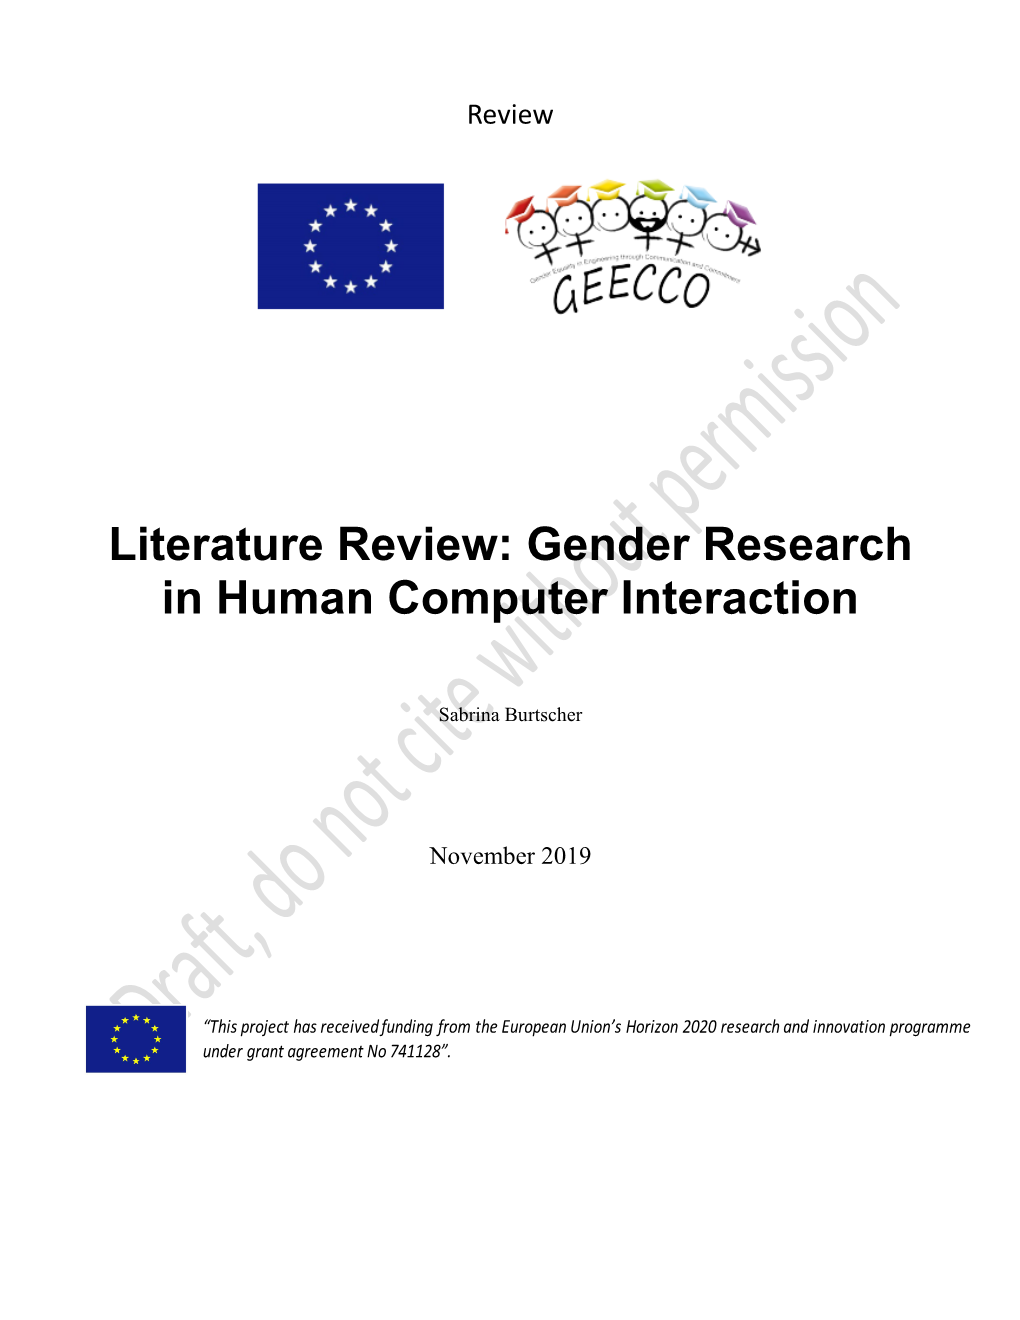 Literature Review: Gender Research in Human Computer Interaction